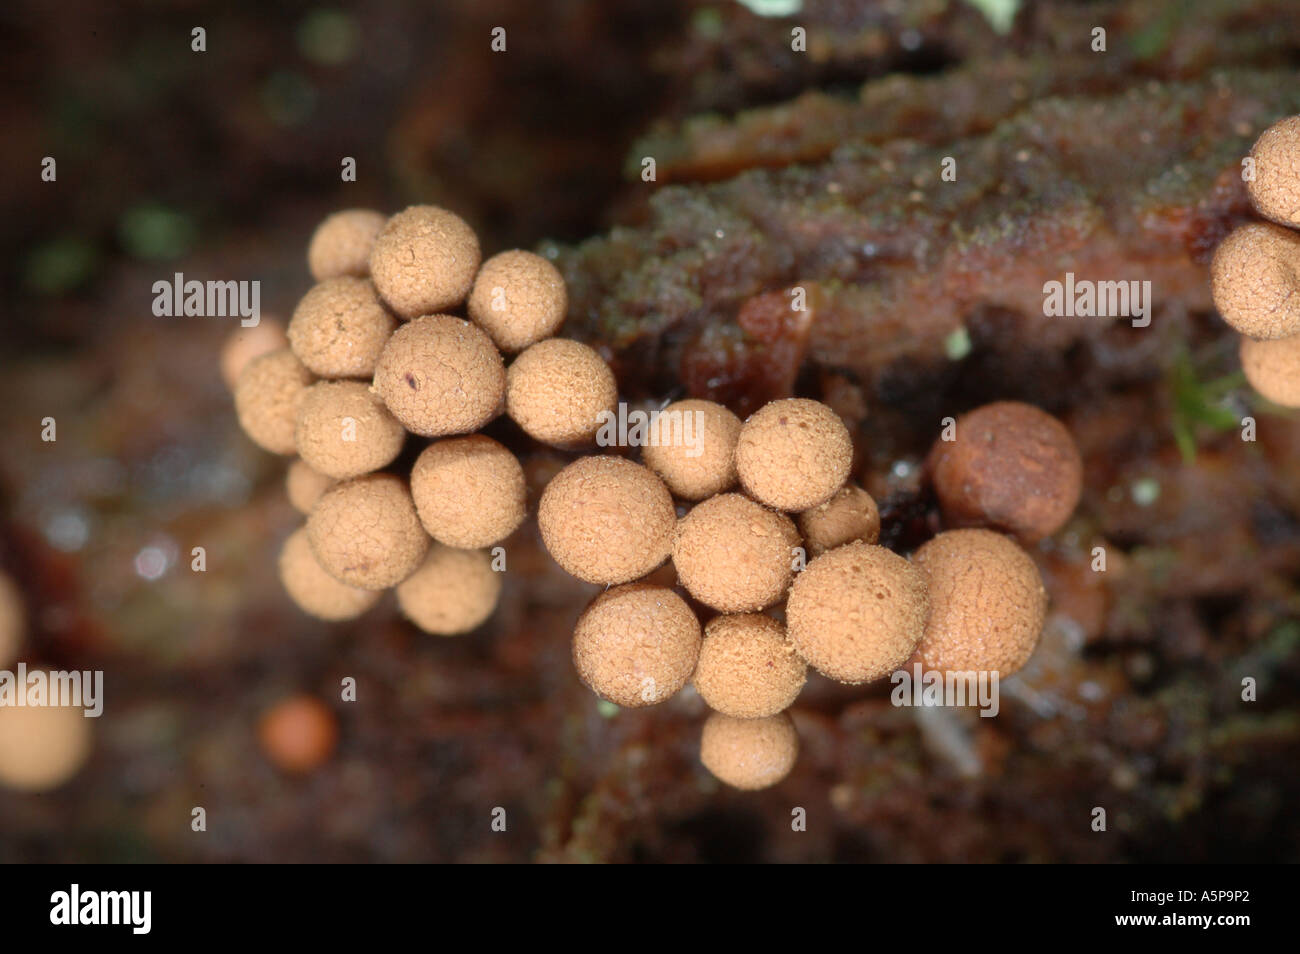 A group of stalked fruiting bodies of slime mould myxomycete Cribraria argillacea growing on the wood Stock Photo